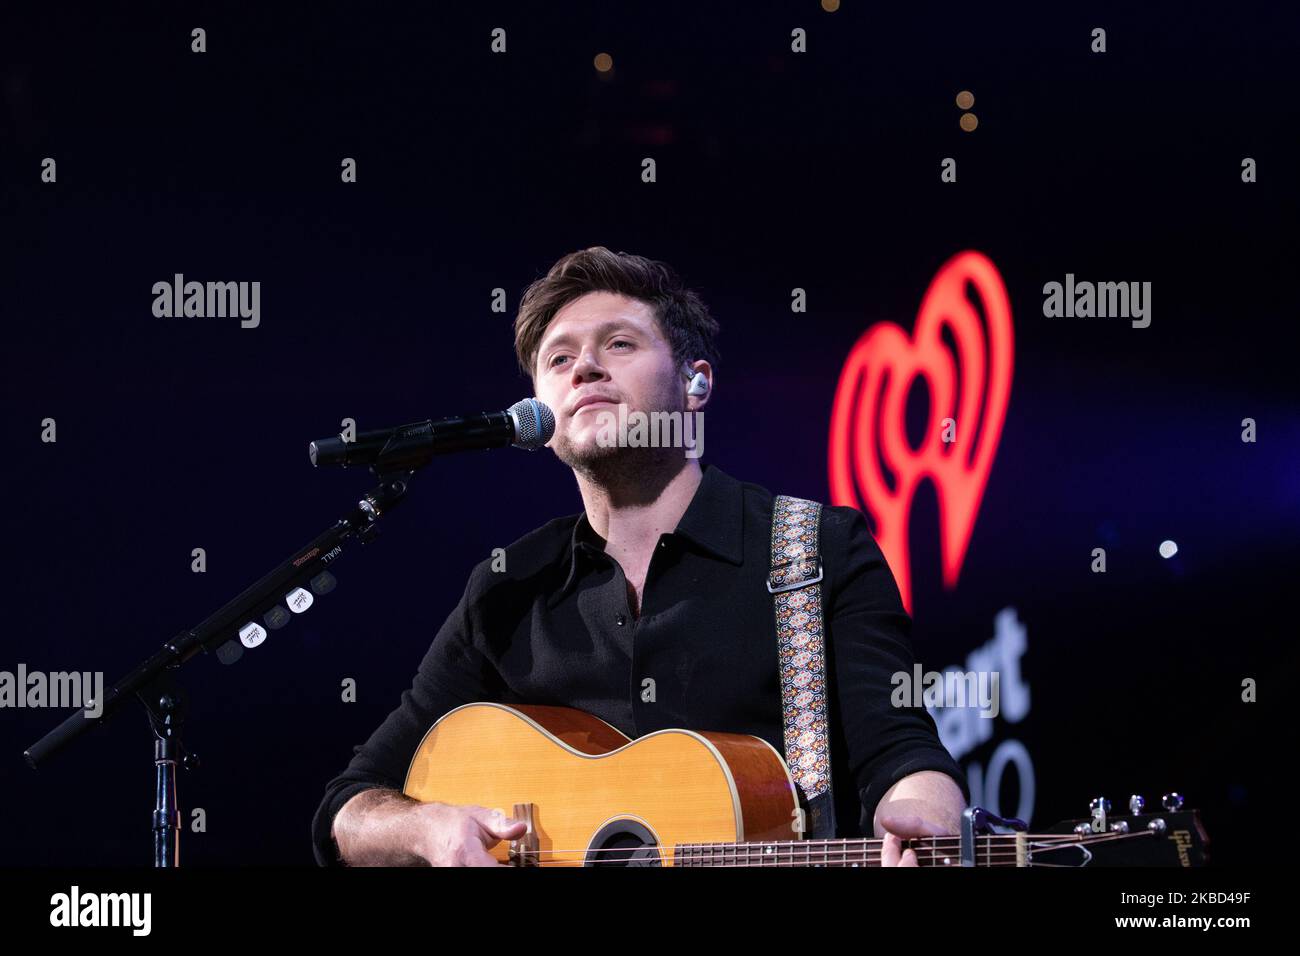 Niall Horan performs during 99.5's iHeartRadio Jingle Ball 2019 at Capital One Arena in Washington, D.C. on Monday, December 16, 2019. (Photo by Cheriss May) (Photo by Cheriss May/NurPhoto) Stock Photo